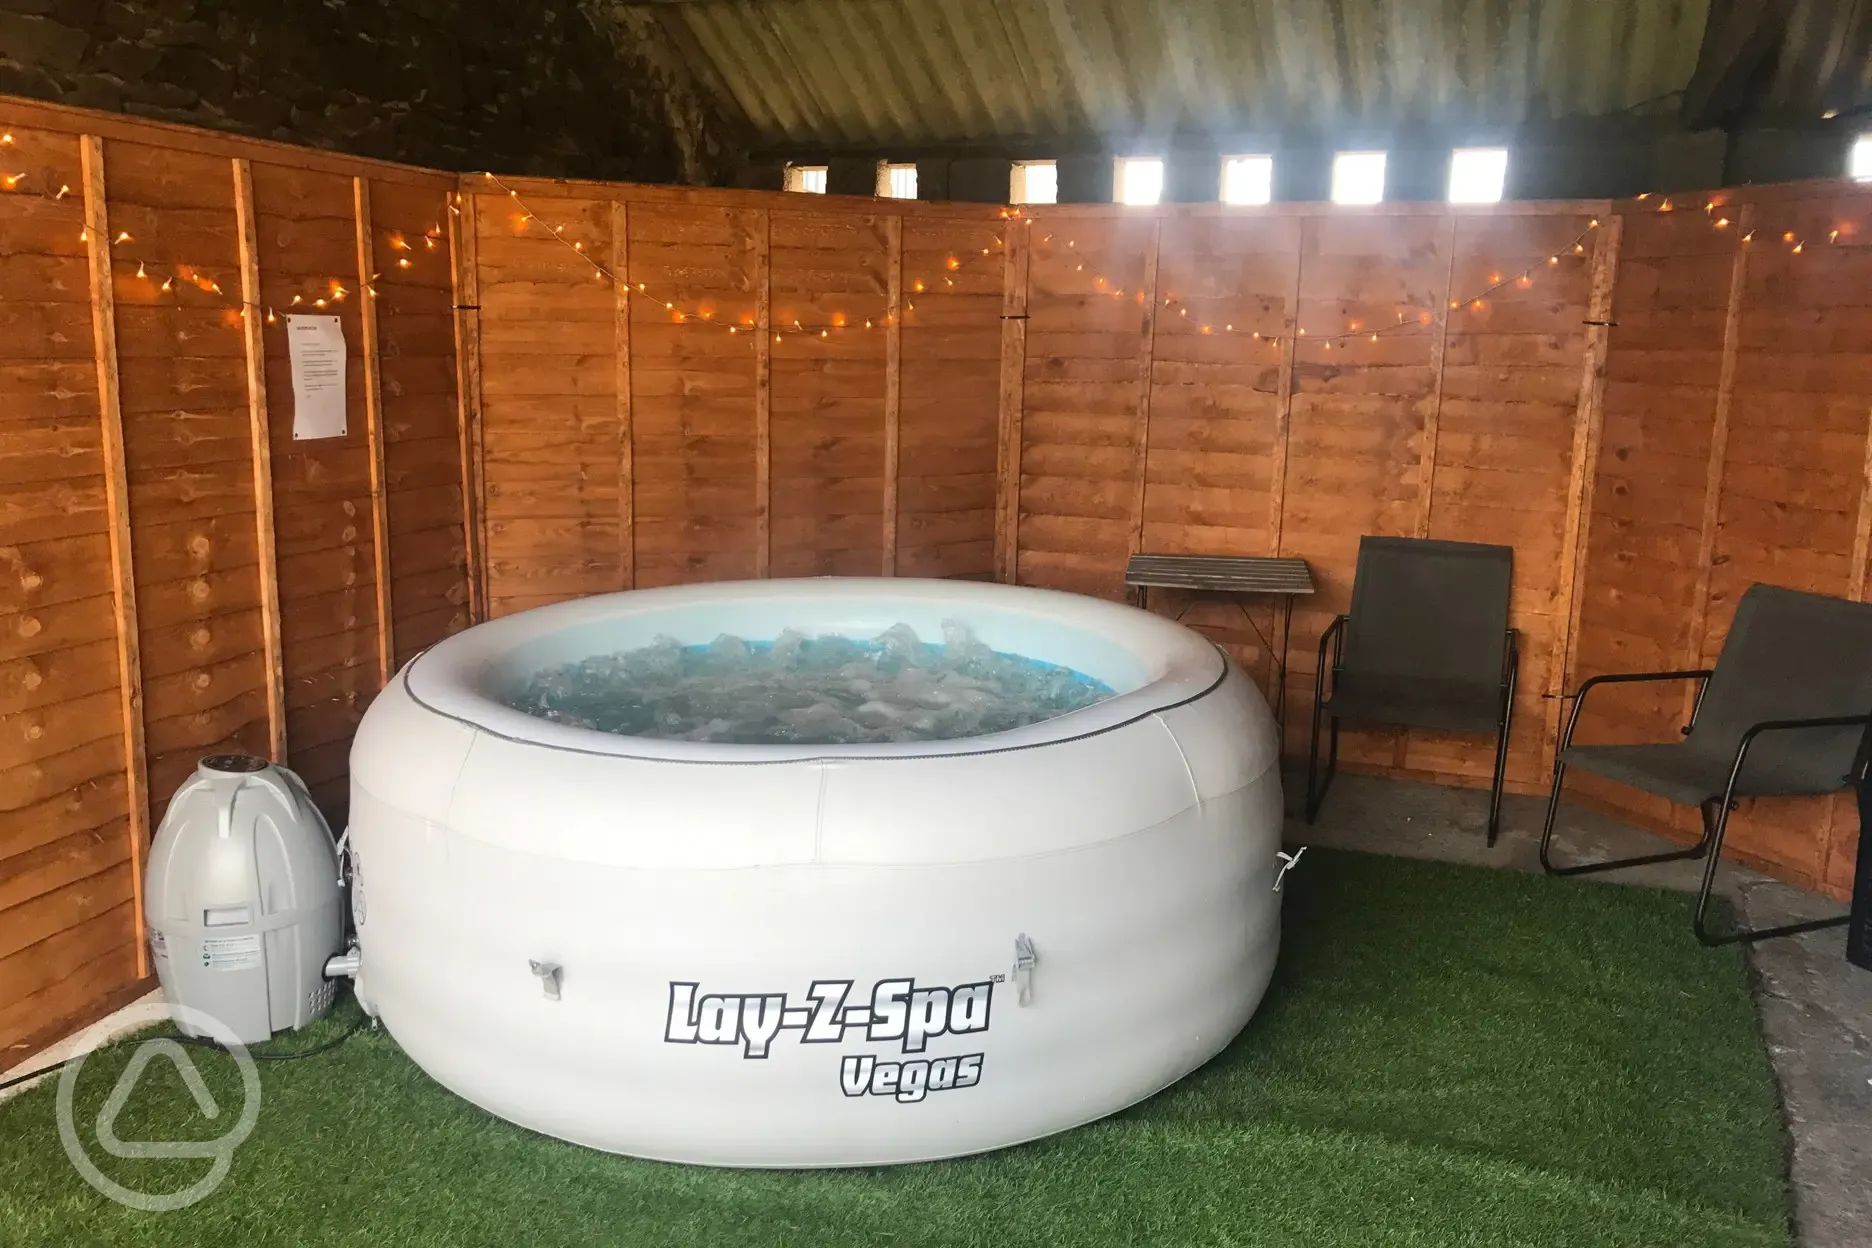 How about booking the hot tub to make it extra special